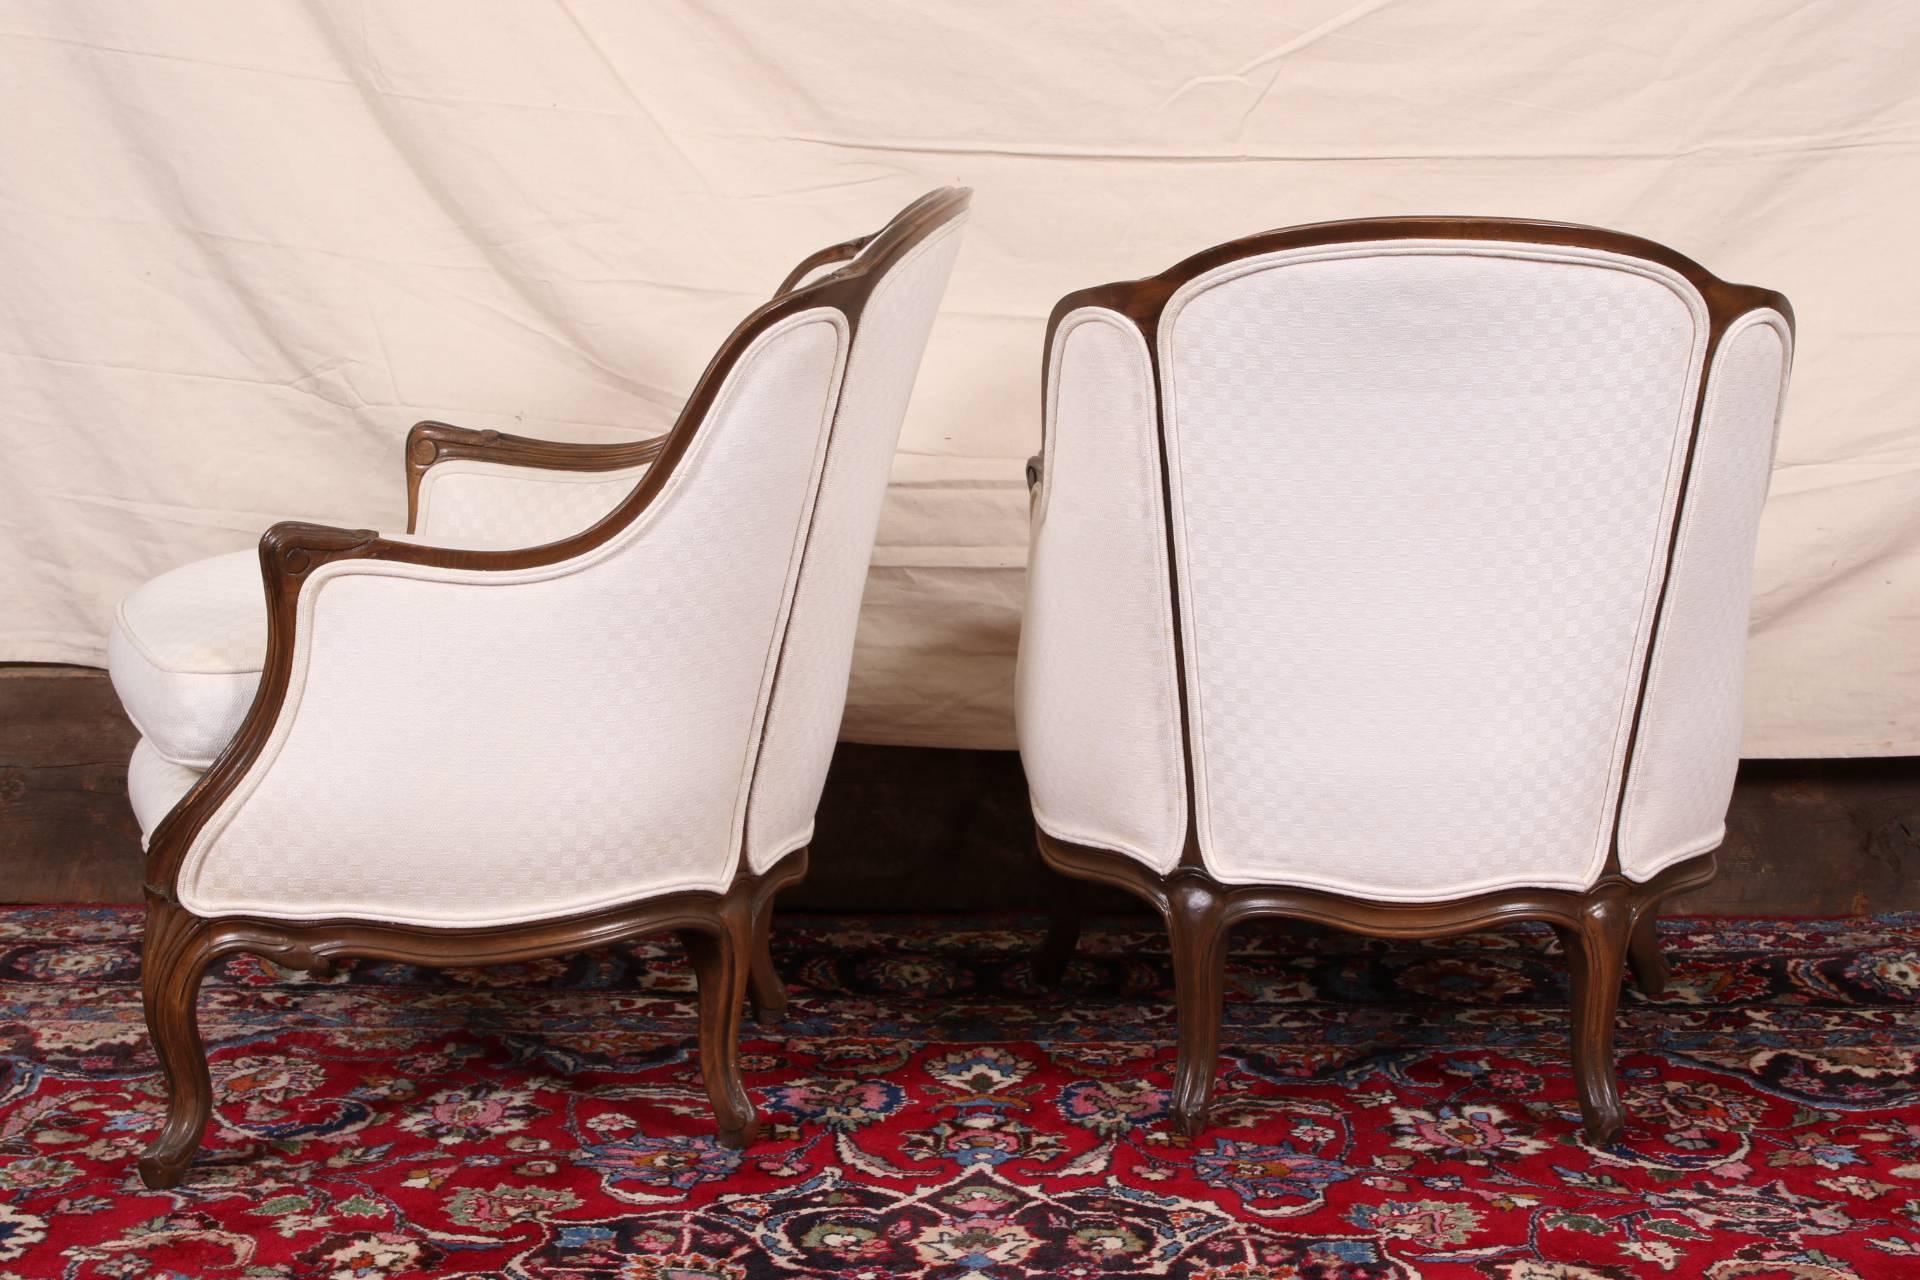 Carved walnut frames with scrolled arms and acanthus leaves on cabriole legs. Upholstered in a cream checked fabric. 
Condition: some wear to the finish on the arms and very slight markings to the fabric.